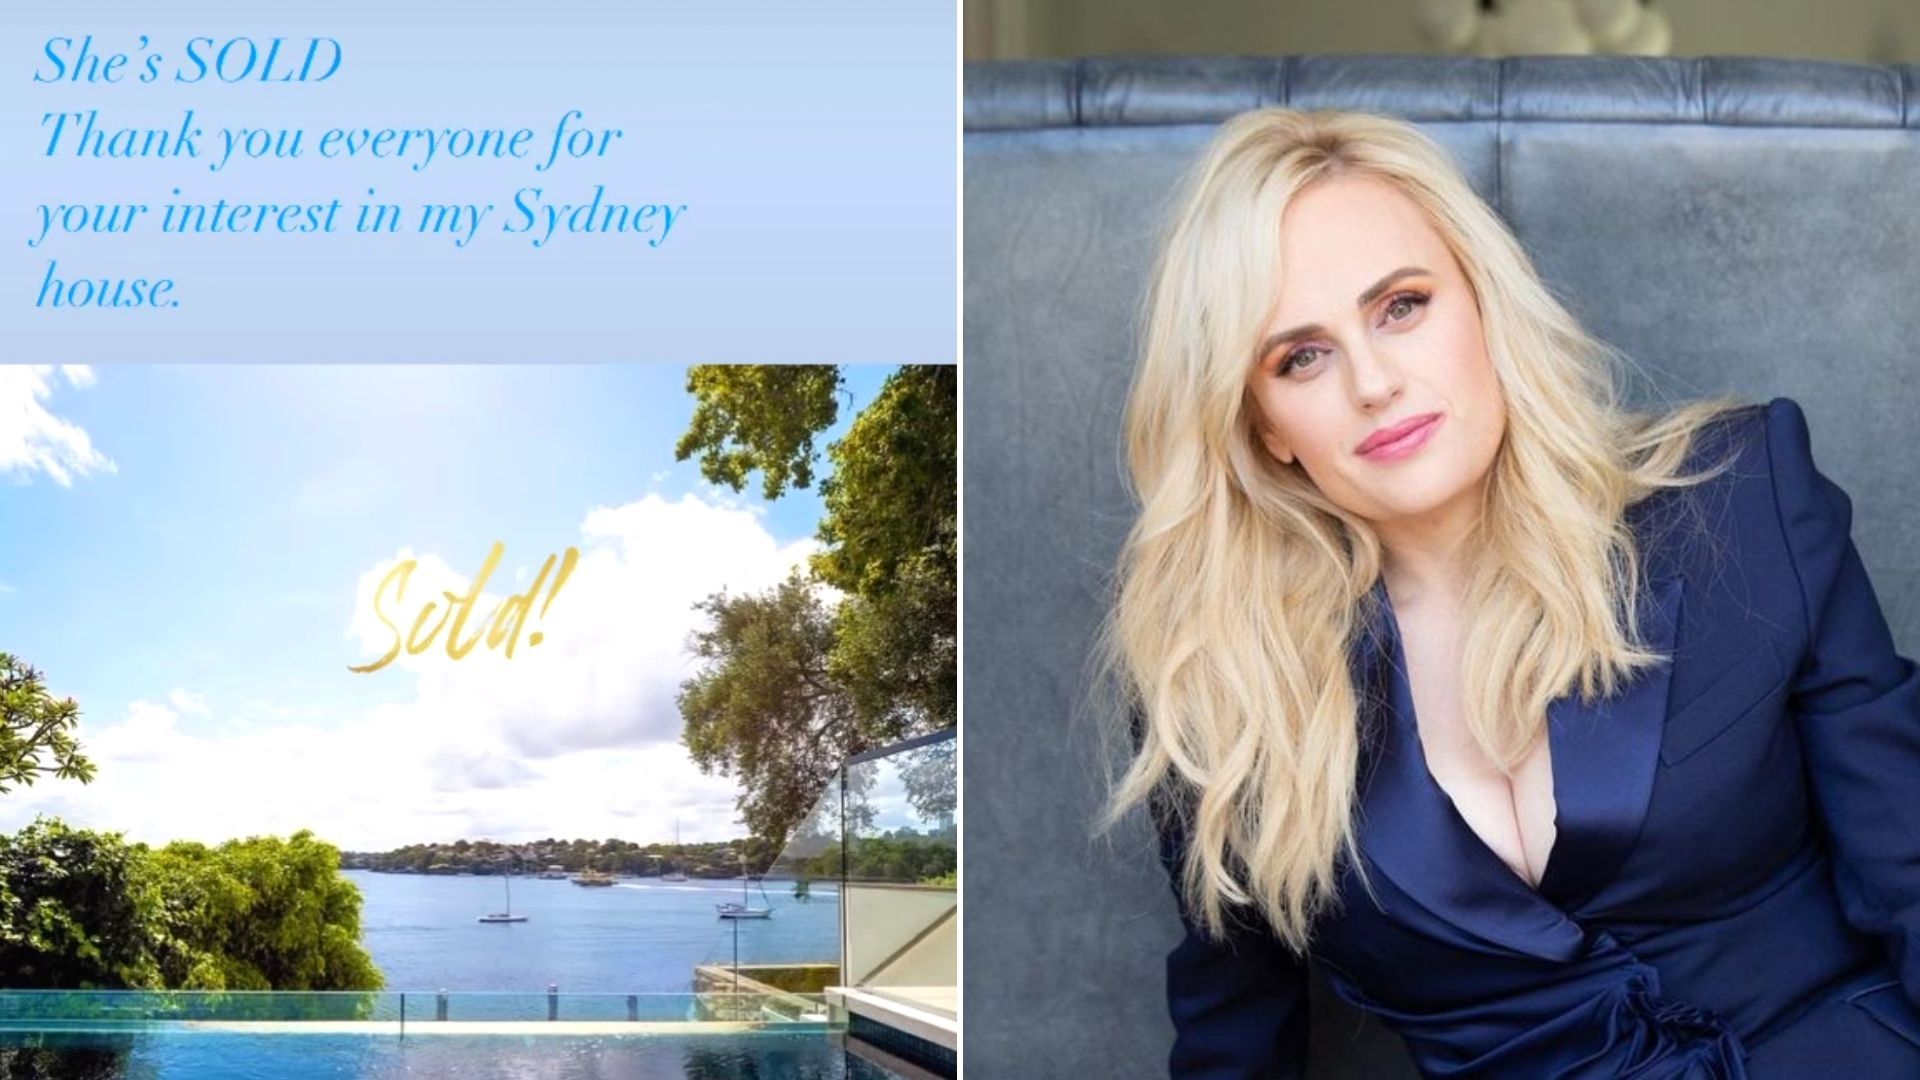 Rebel Wilson has officially sold her pitch-perfect Sydney Harbour home